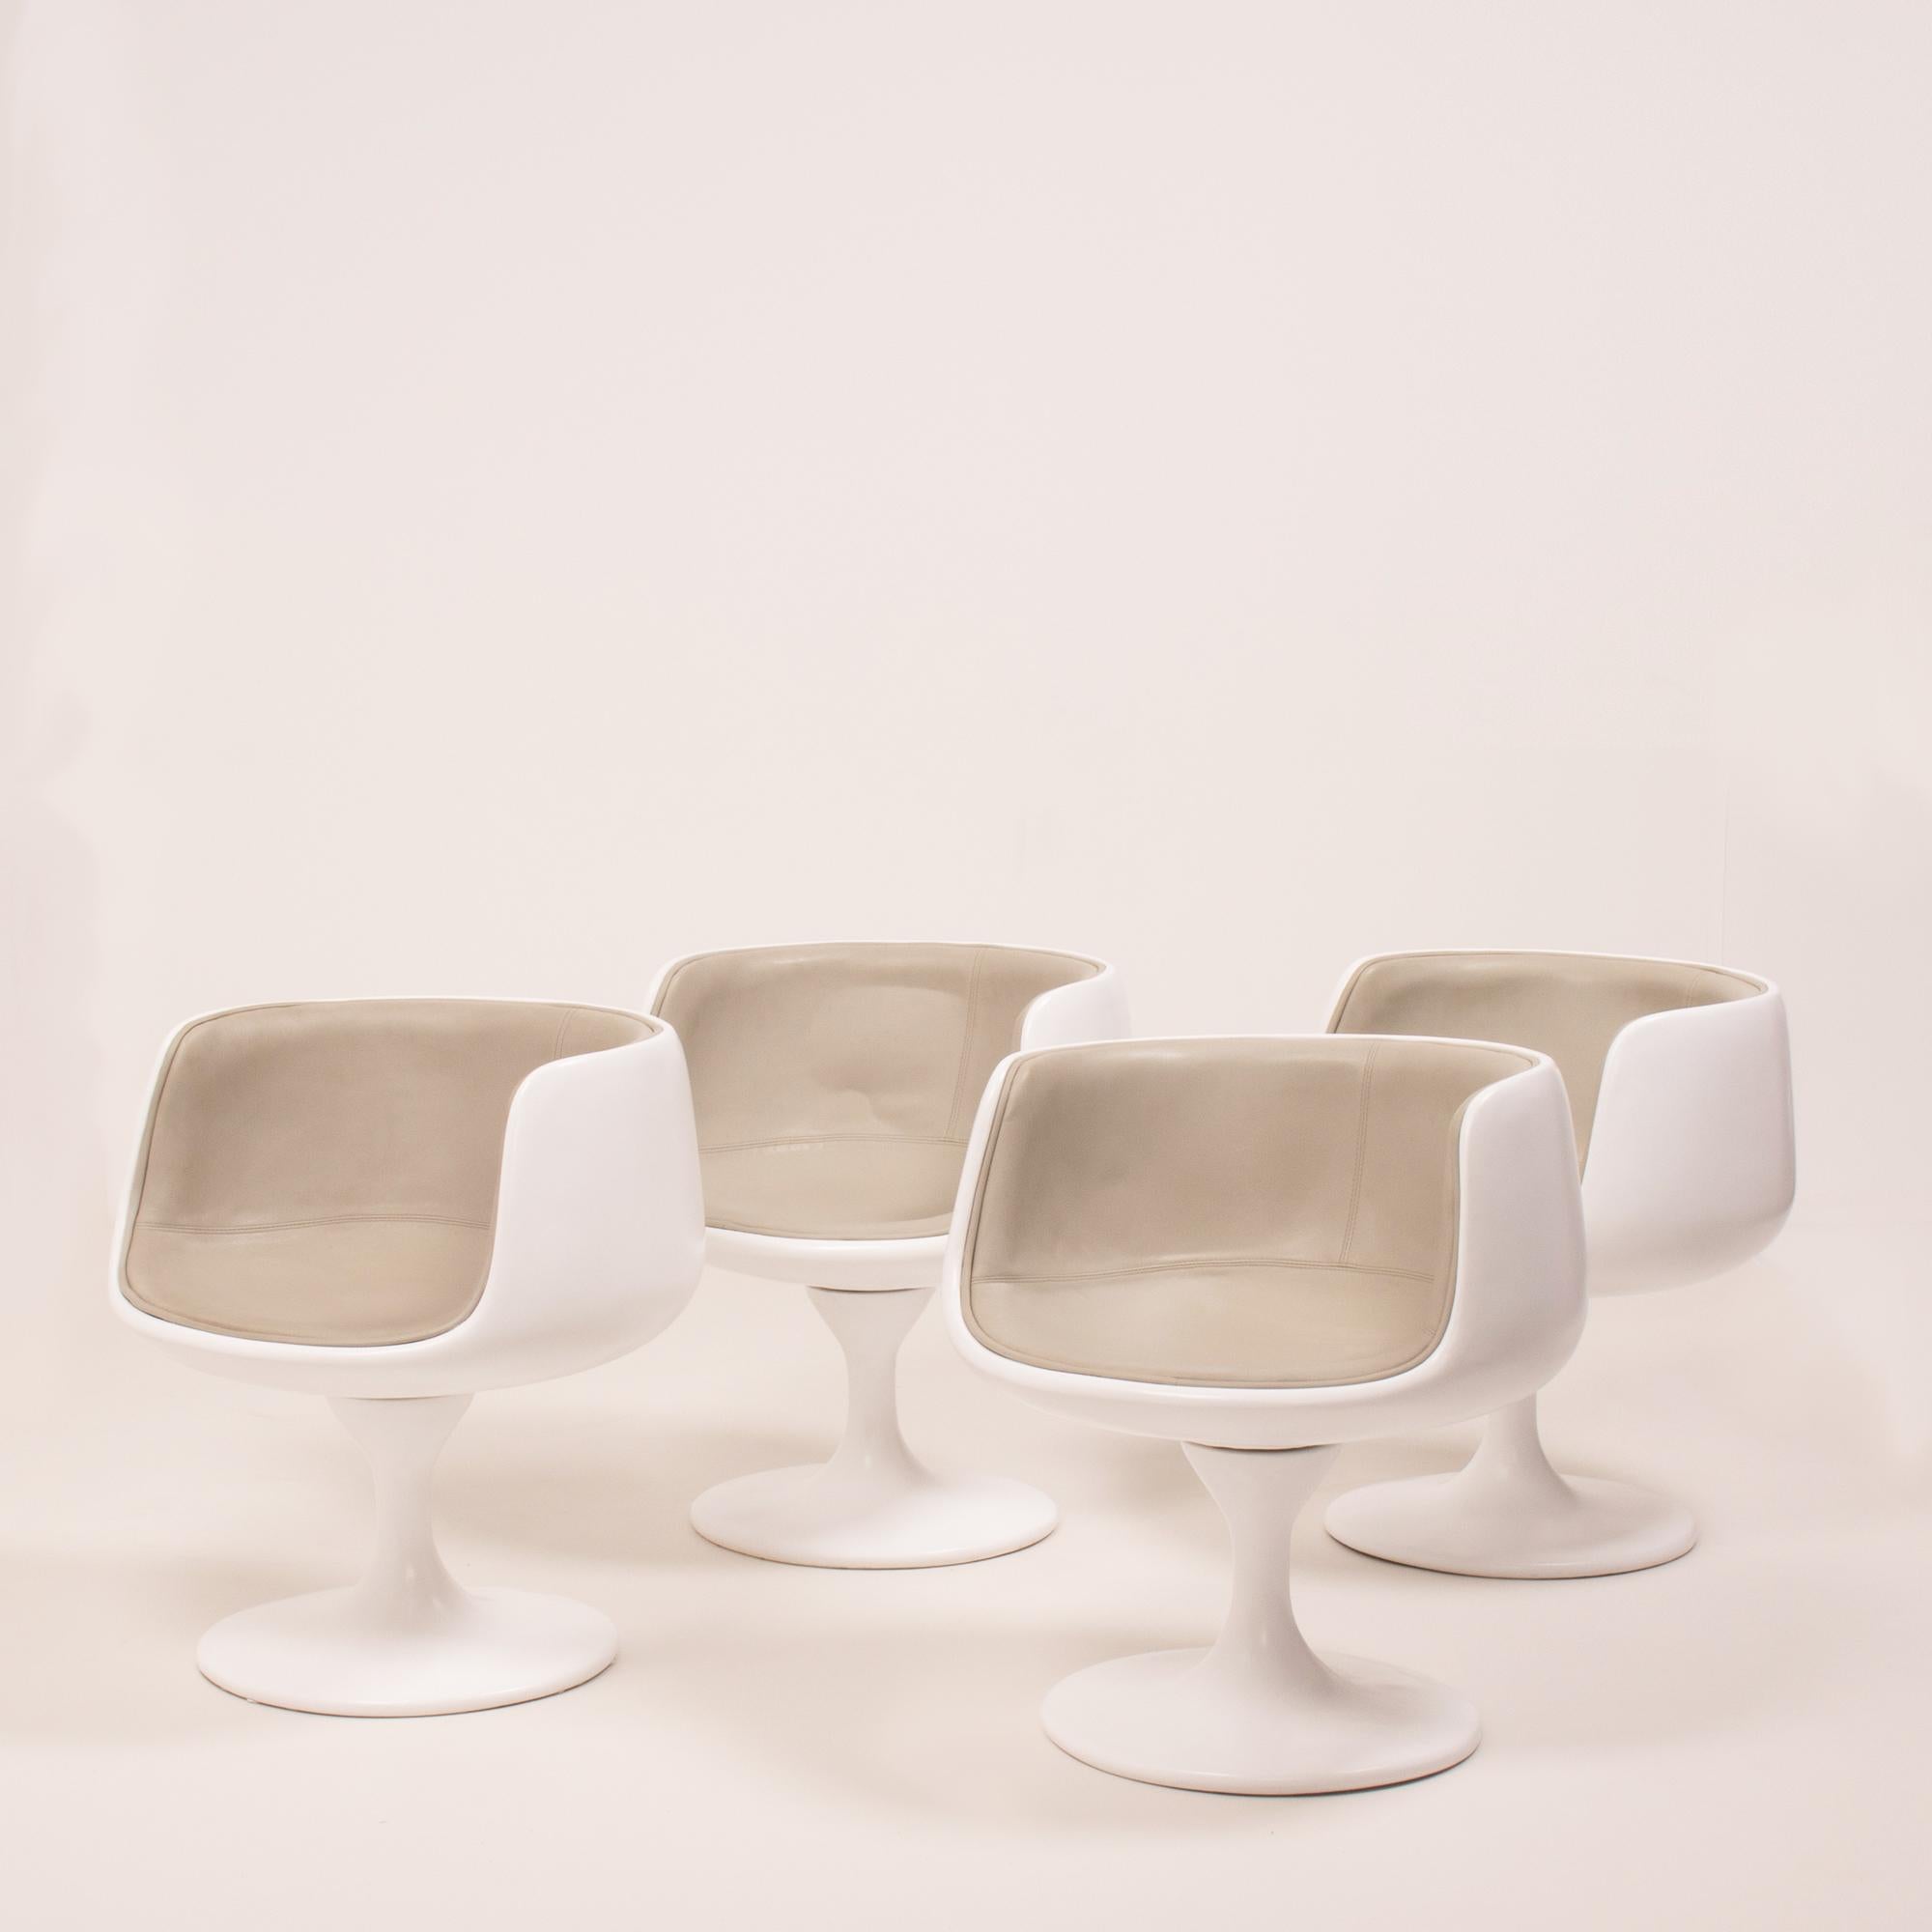 This set of four vintage tub chairs have a sleek, modernist aesthetic and feature the iconic ‘tulip’ style base originally designed by Eero Saarinen.

The chairs have curved white shells, which have been newly lacquered, and are upholstered in